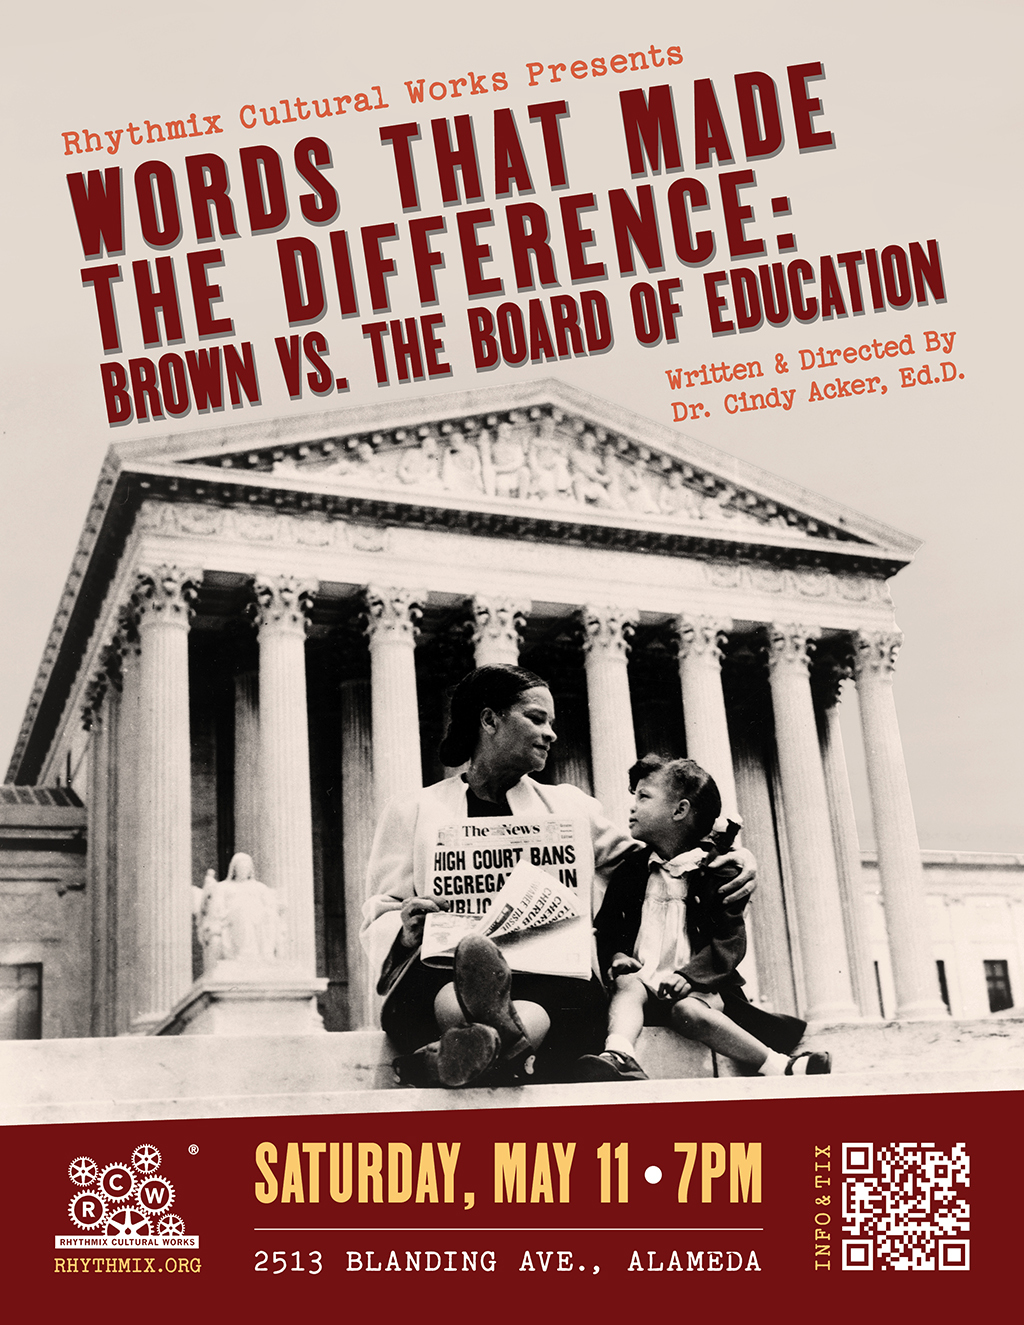 Rhythmix Cultural Works Rhythmix Presents  WORDS THAT MADE THE DIFFERENCE  BROWN VS  THE BOARD OF EDUCATION promotion flier on Digifli com